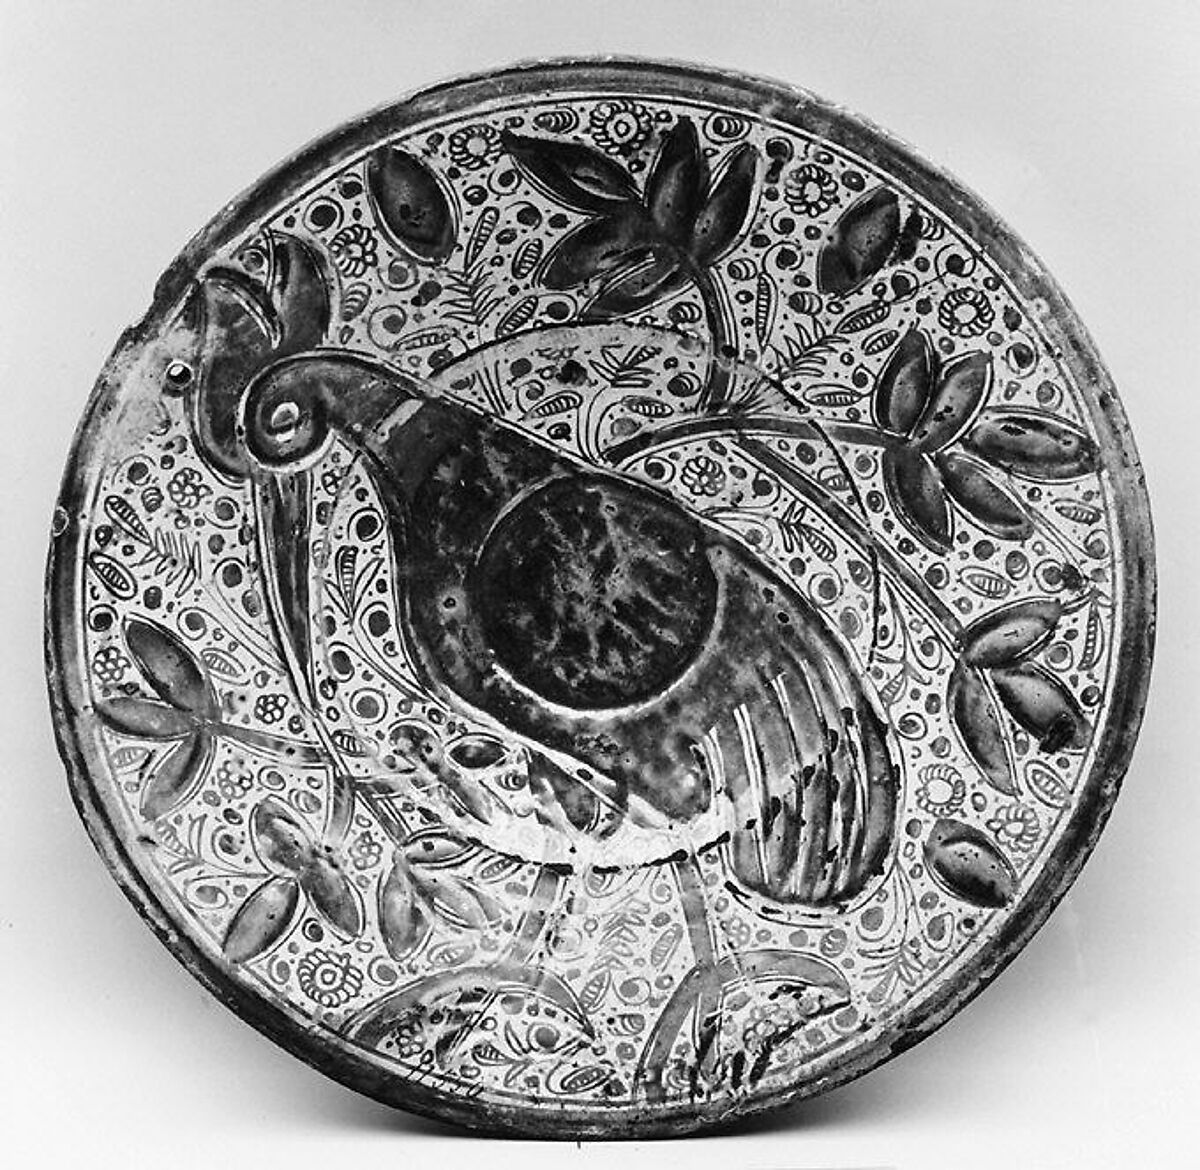 Dish, Tin-glazed and luster-painted earthenware, Spanish, Valencia 